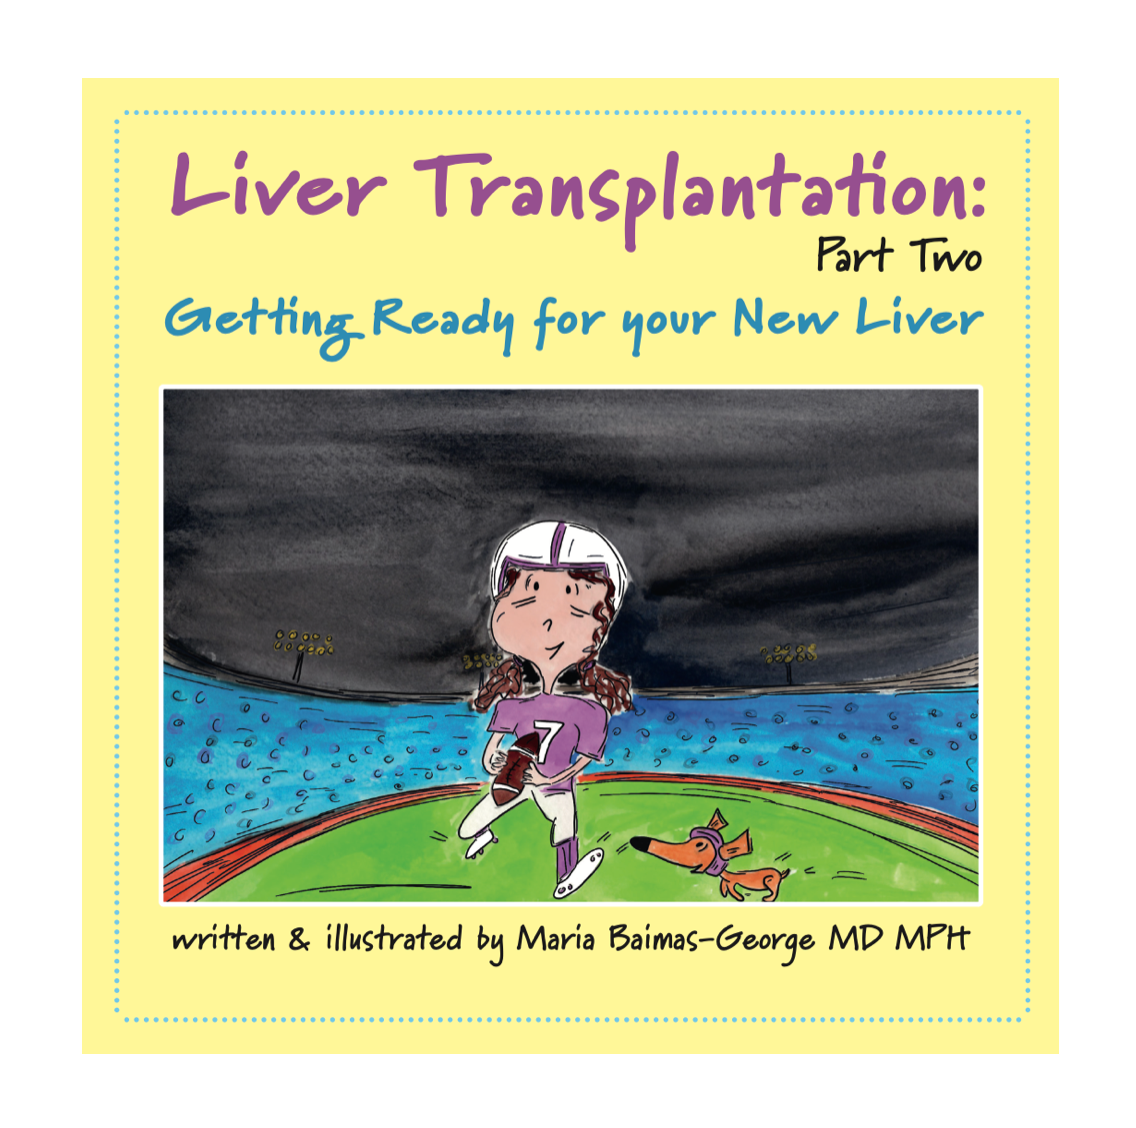 Liver Transplantation, Part Two: Getting Ready for your New Liver